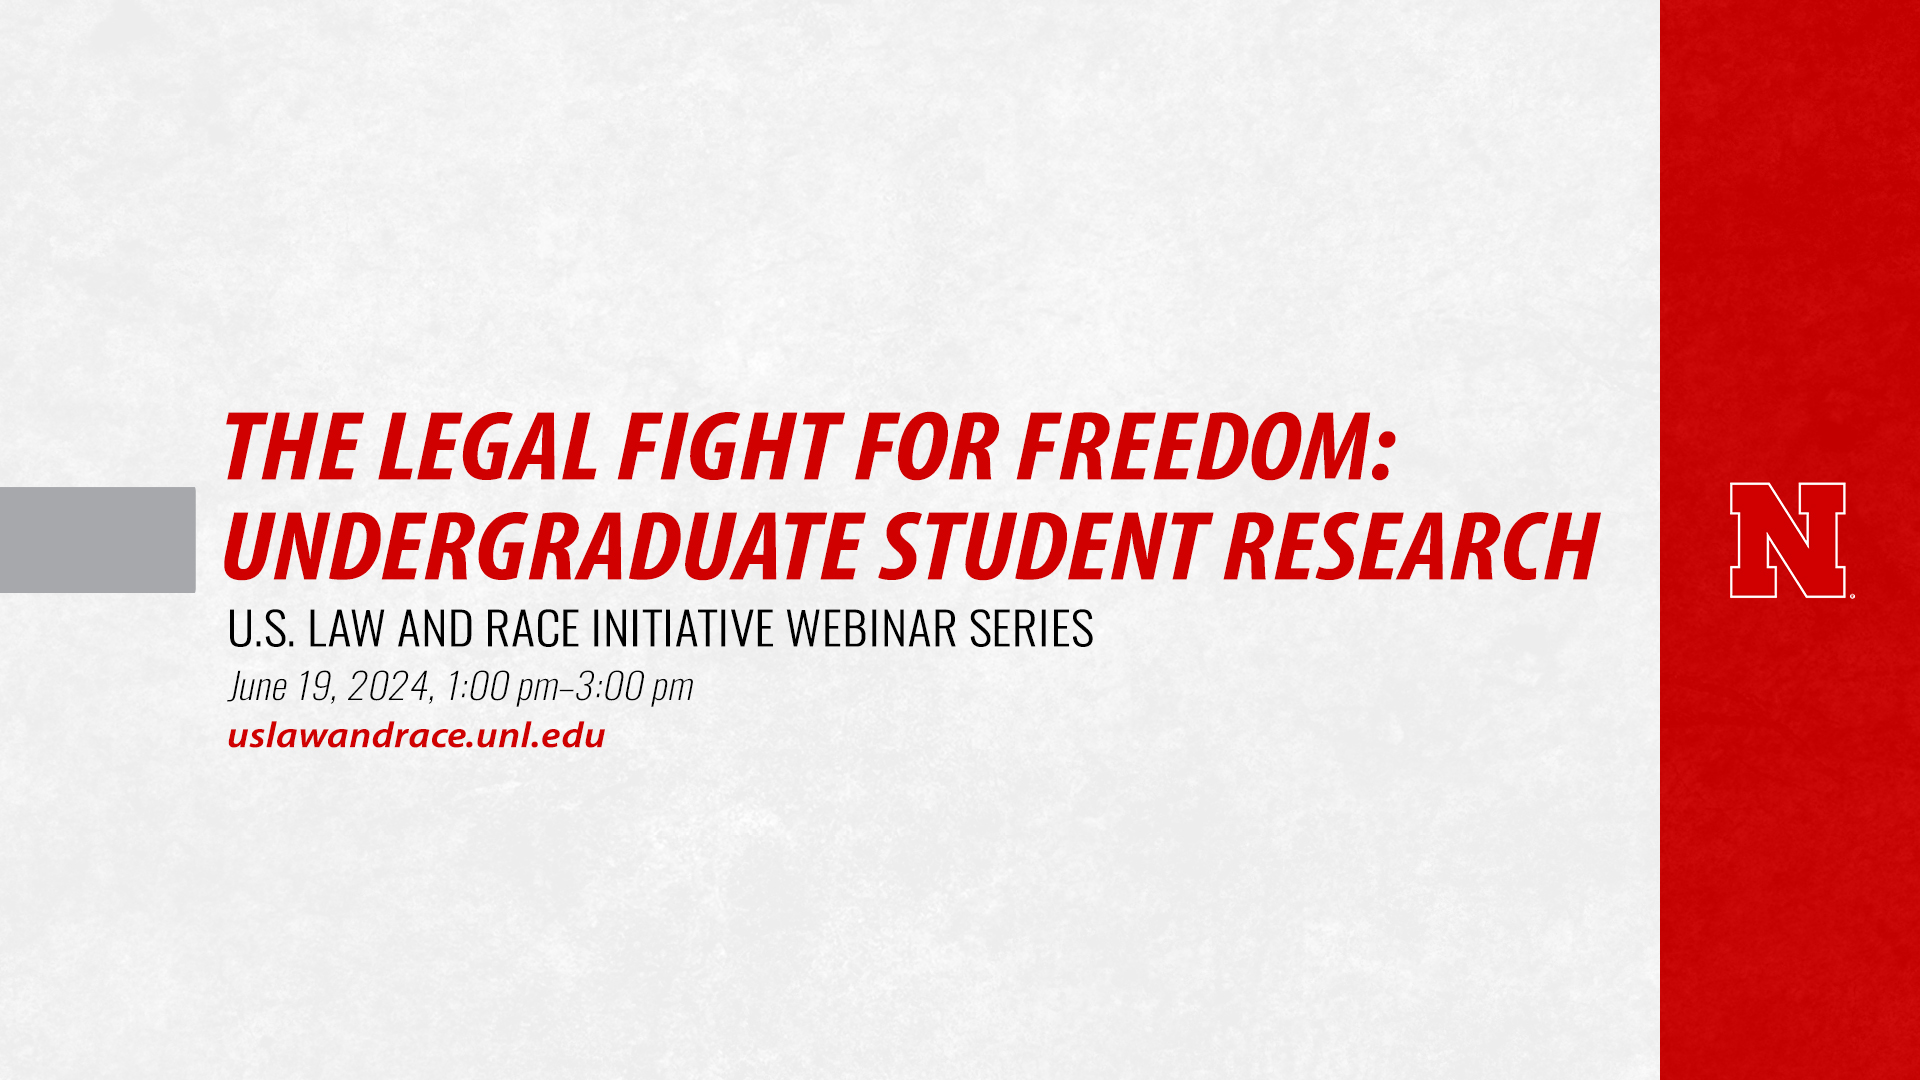 The Legal Fight for Freedom: Undergraduate Student Research